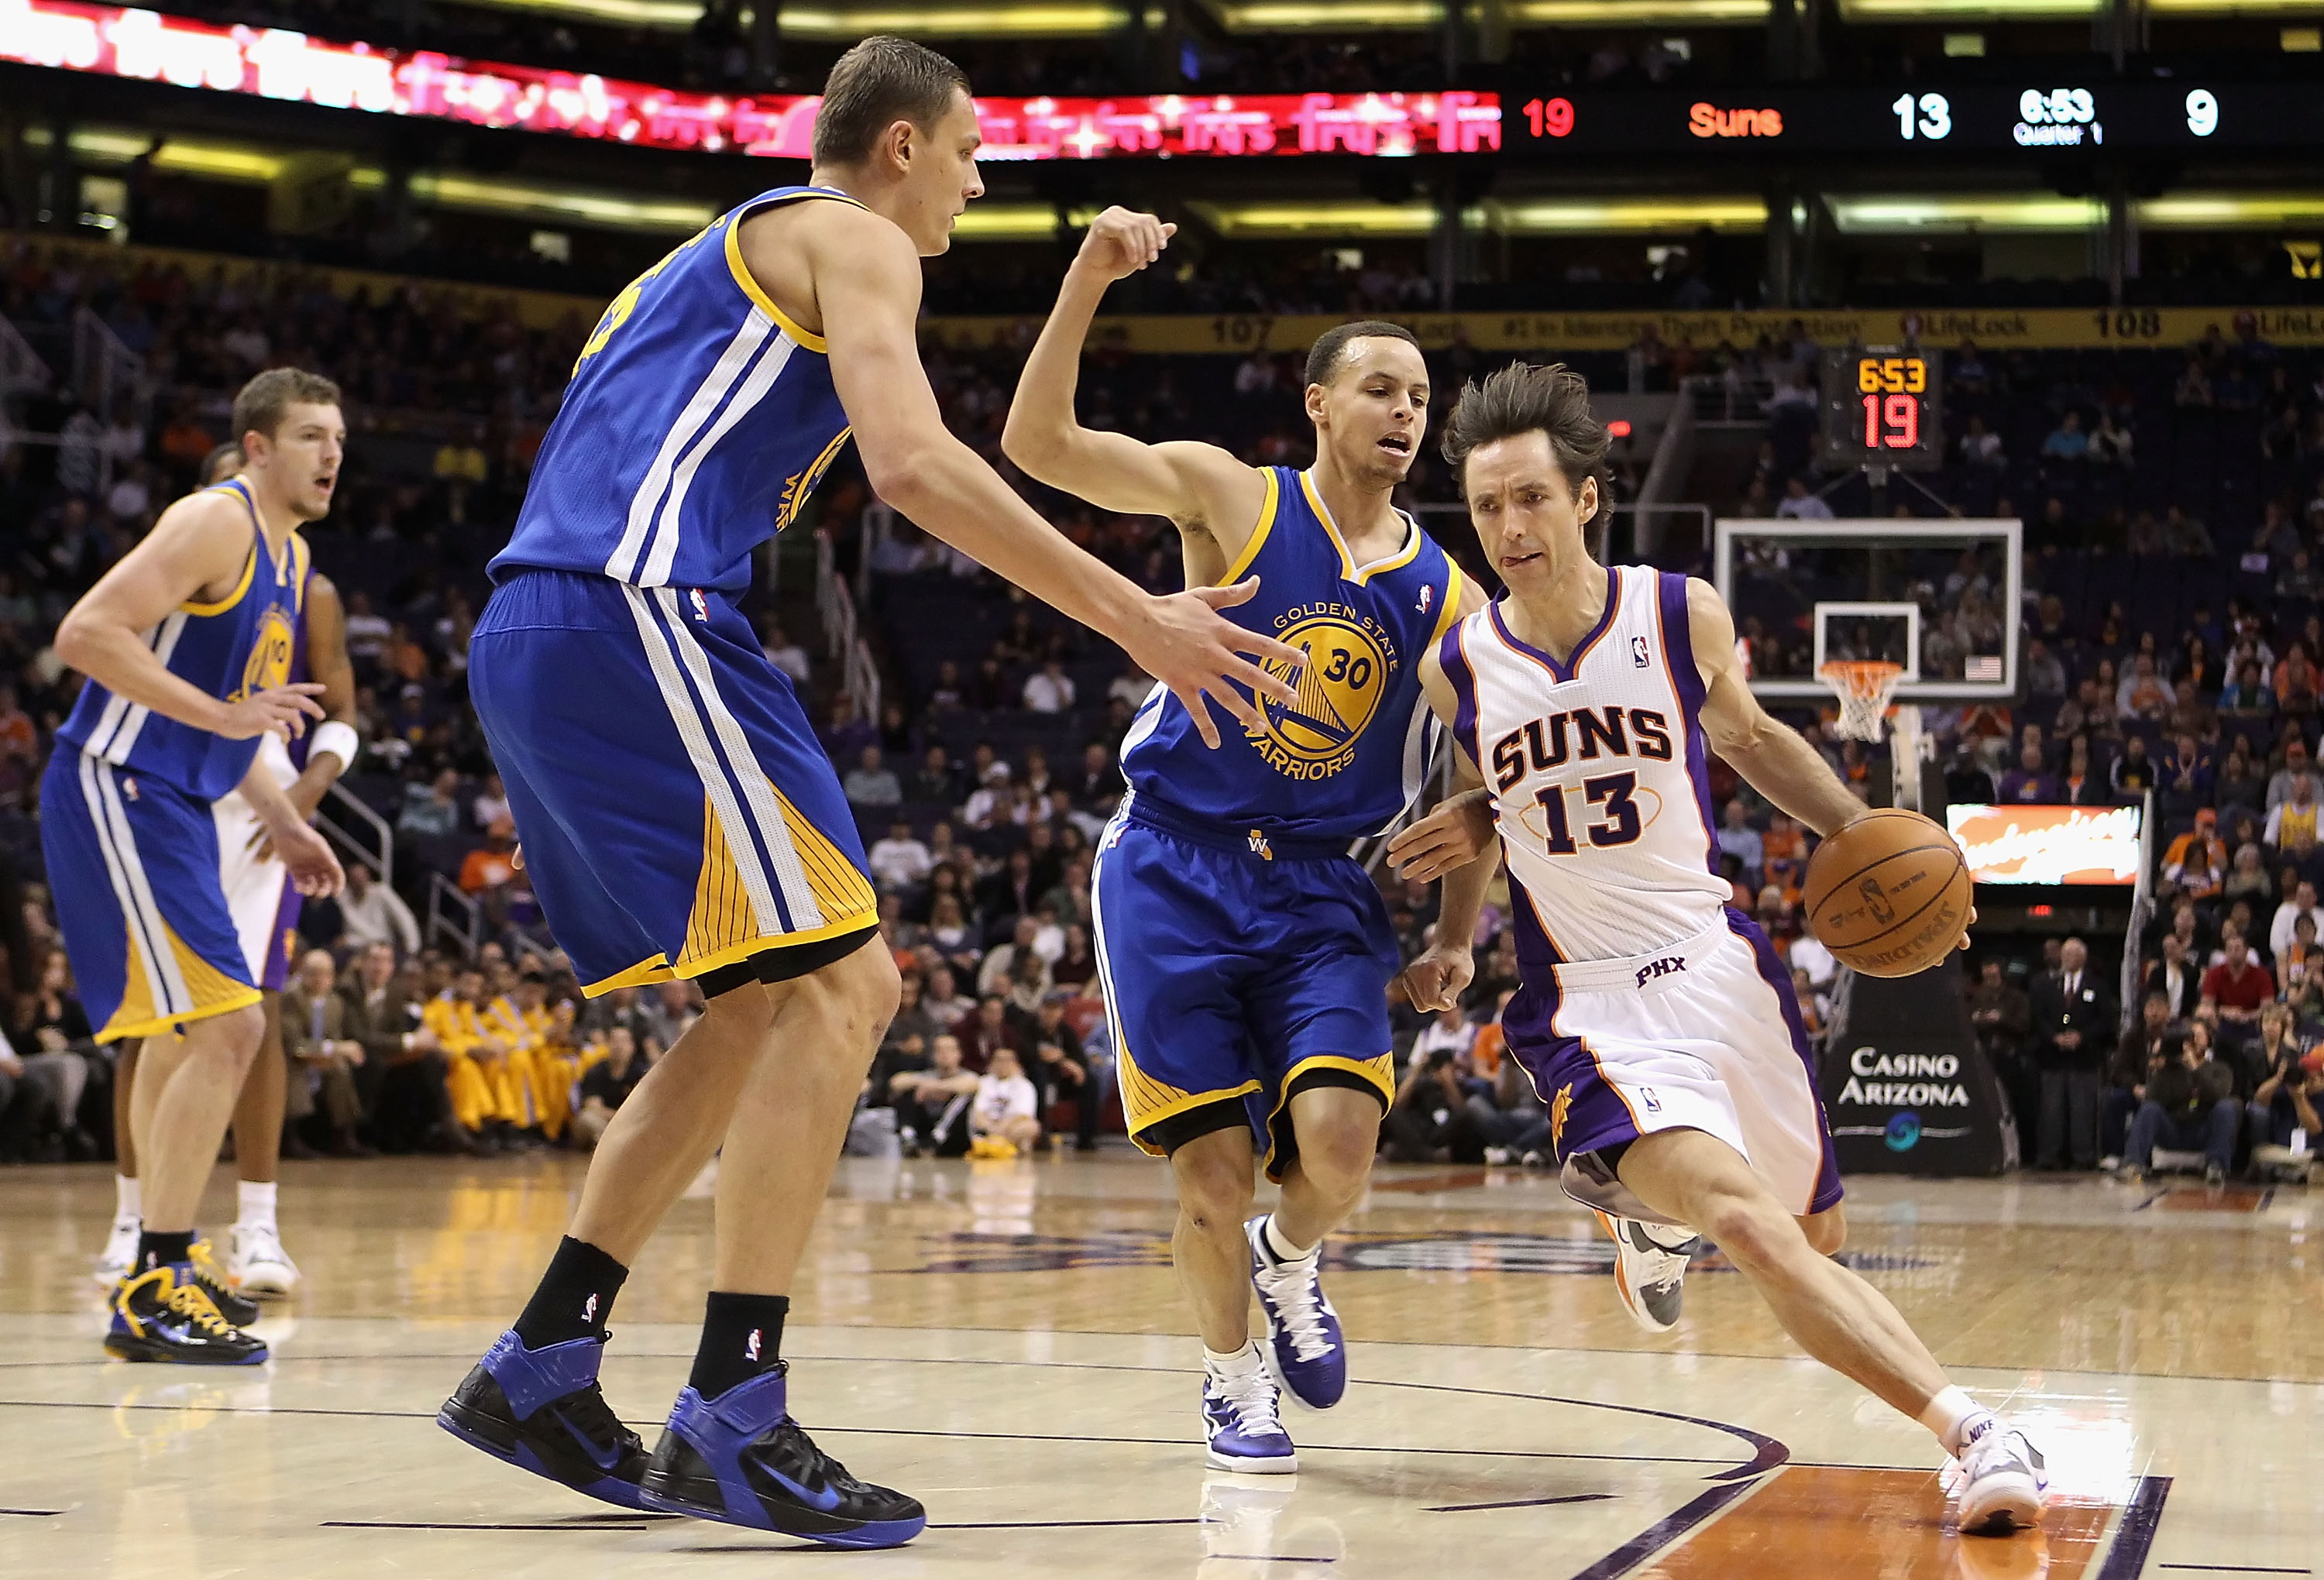 PHOENIX, AZ - FEBRUARY 10:  Steve Nash #13 of the Phoenix Suns drives the ball past Stephen Curry #30 of the Golden State Warriors during the NBA game at US Airways Center on February 10, 2011 in Phoenix, Arizona.  NOTE TO USER: User expressly acknowledge